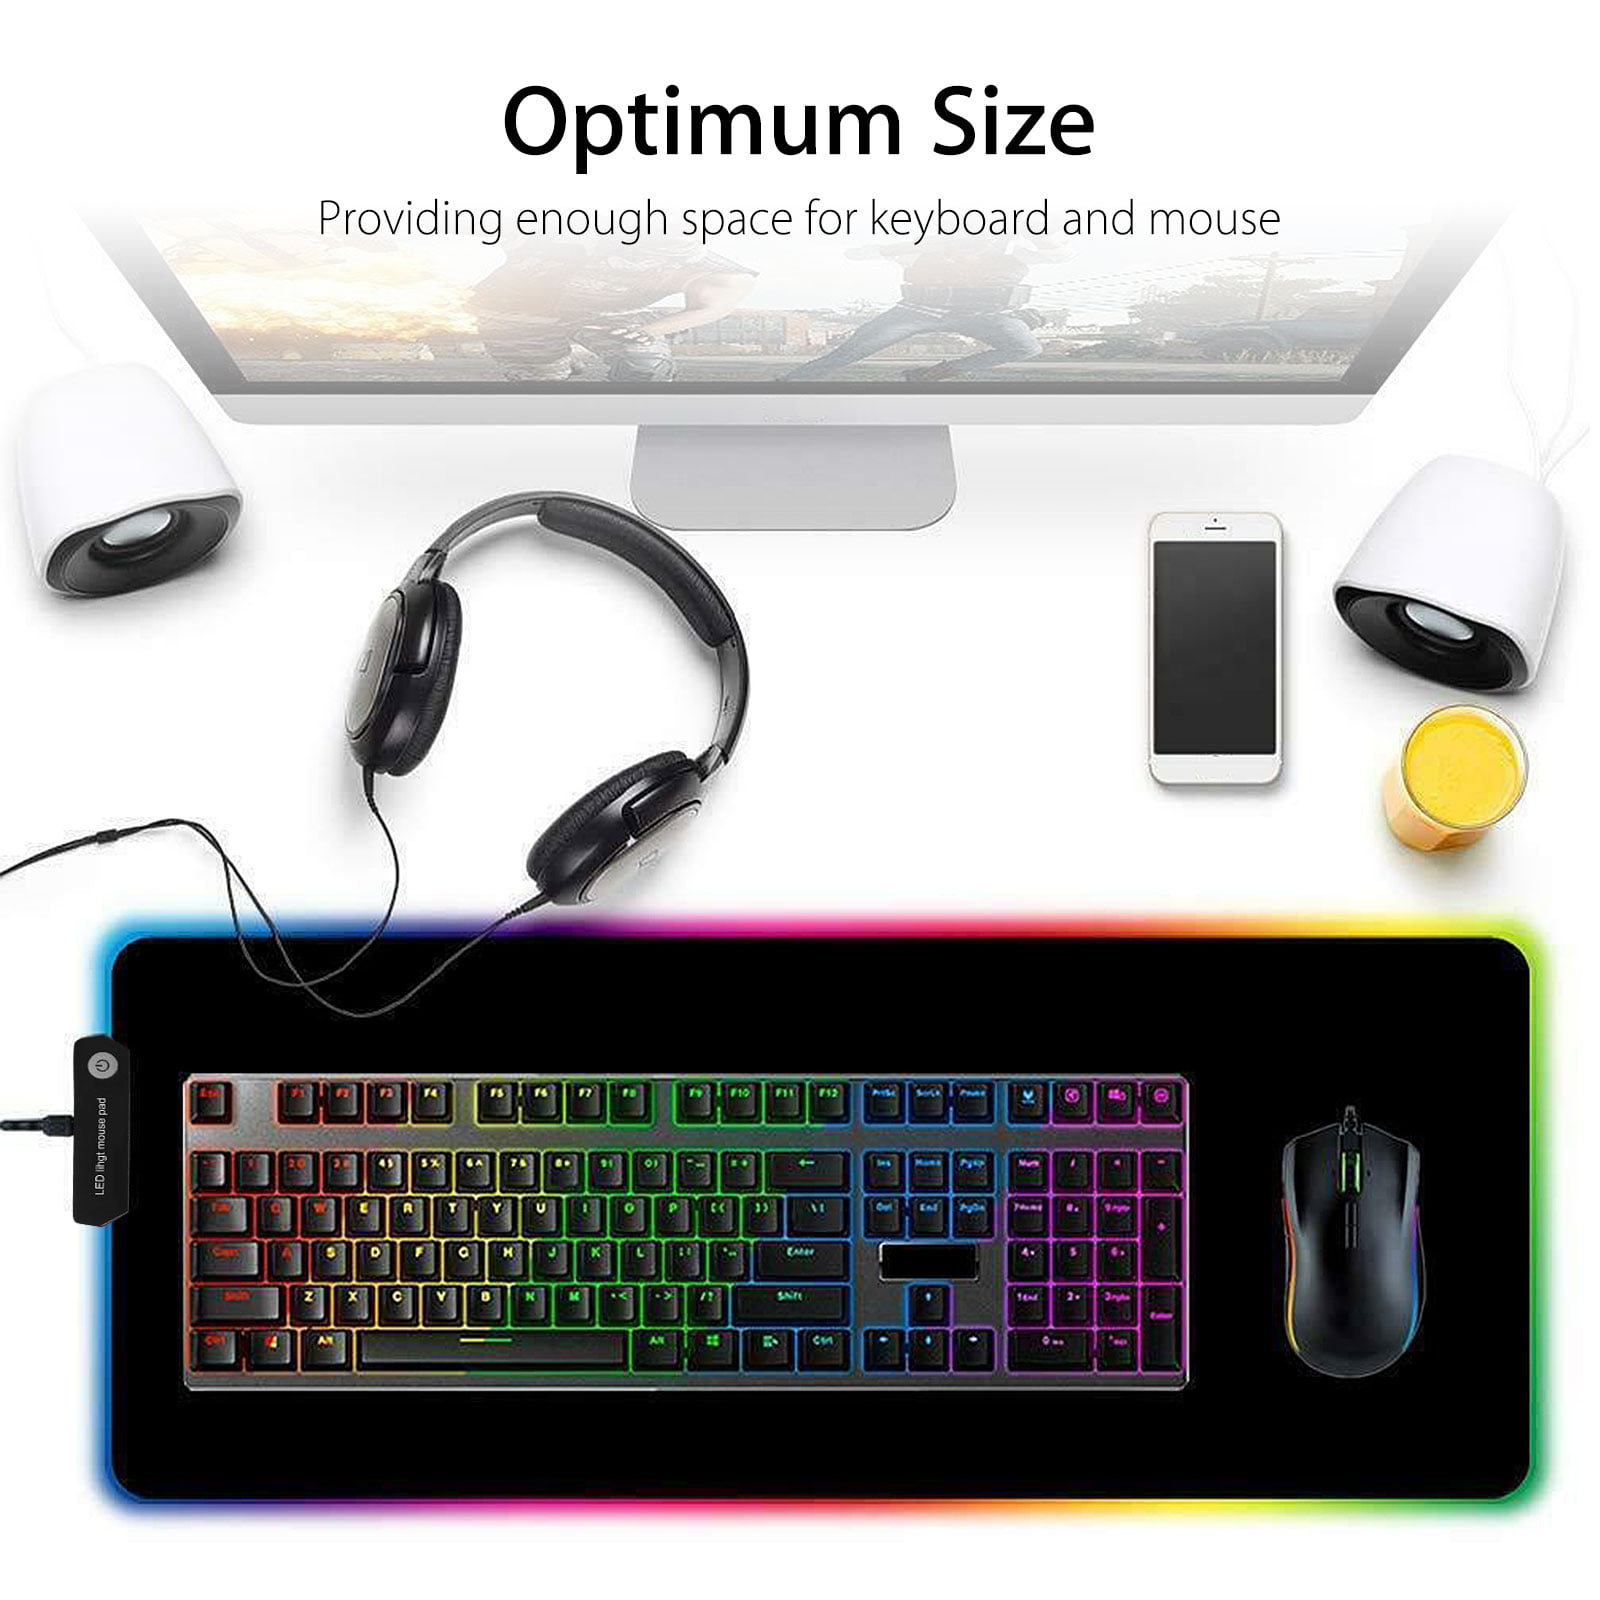 Mouse Pads Anime Girl RGB Computer Desk Mat for Mouse,LED Keyboard Pads with 14 Lighting Modes,Glowing Full Size Laptop Mat Gamer Office Home,USB Wired 600x300x4mm 